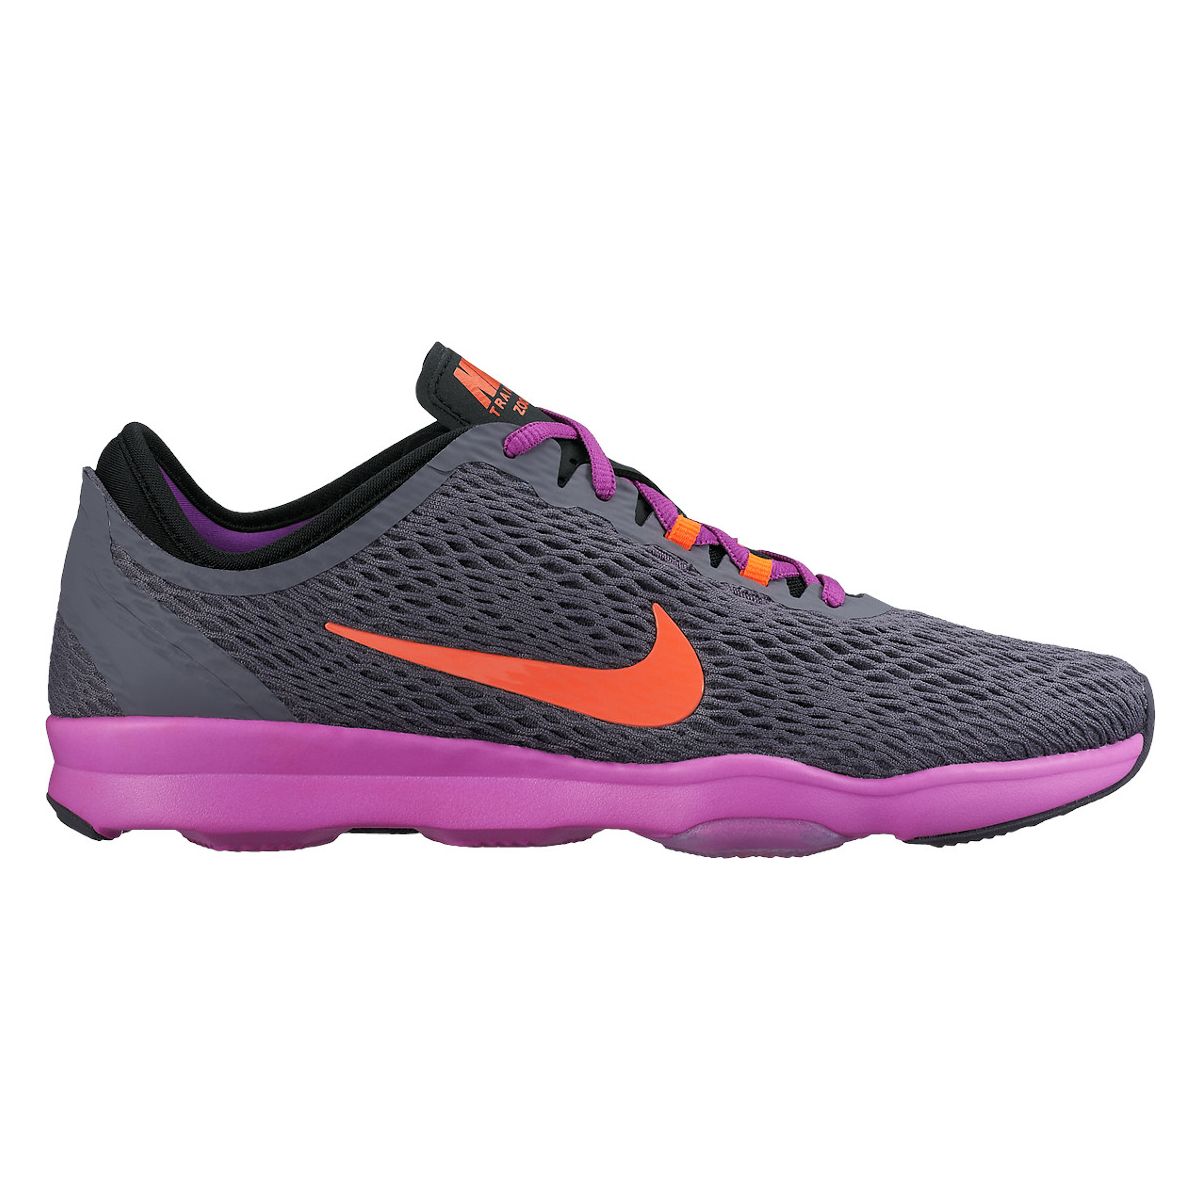 Nike Air Zoom Fit Women's Training Shoes 704658-011